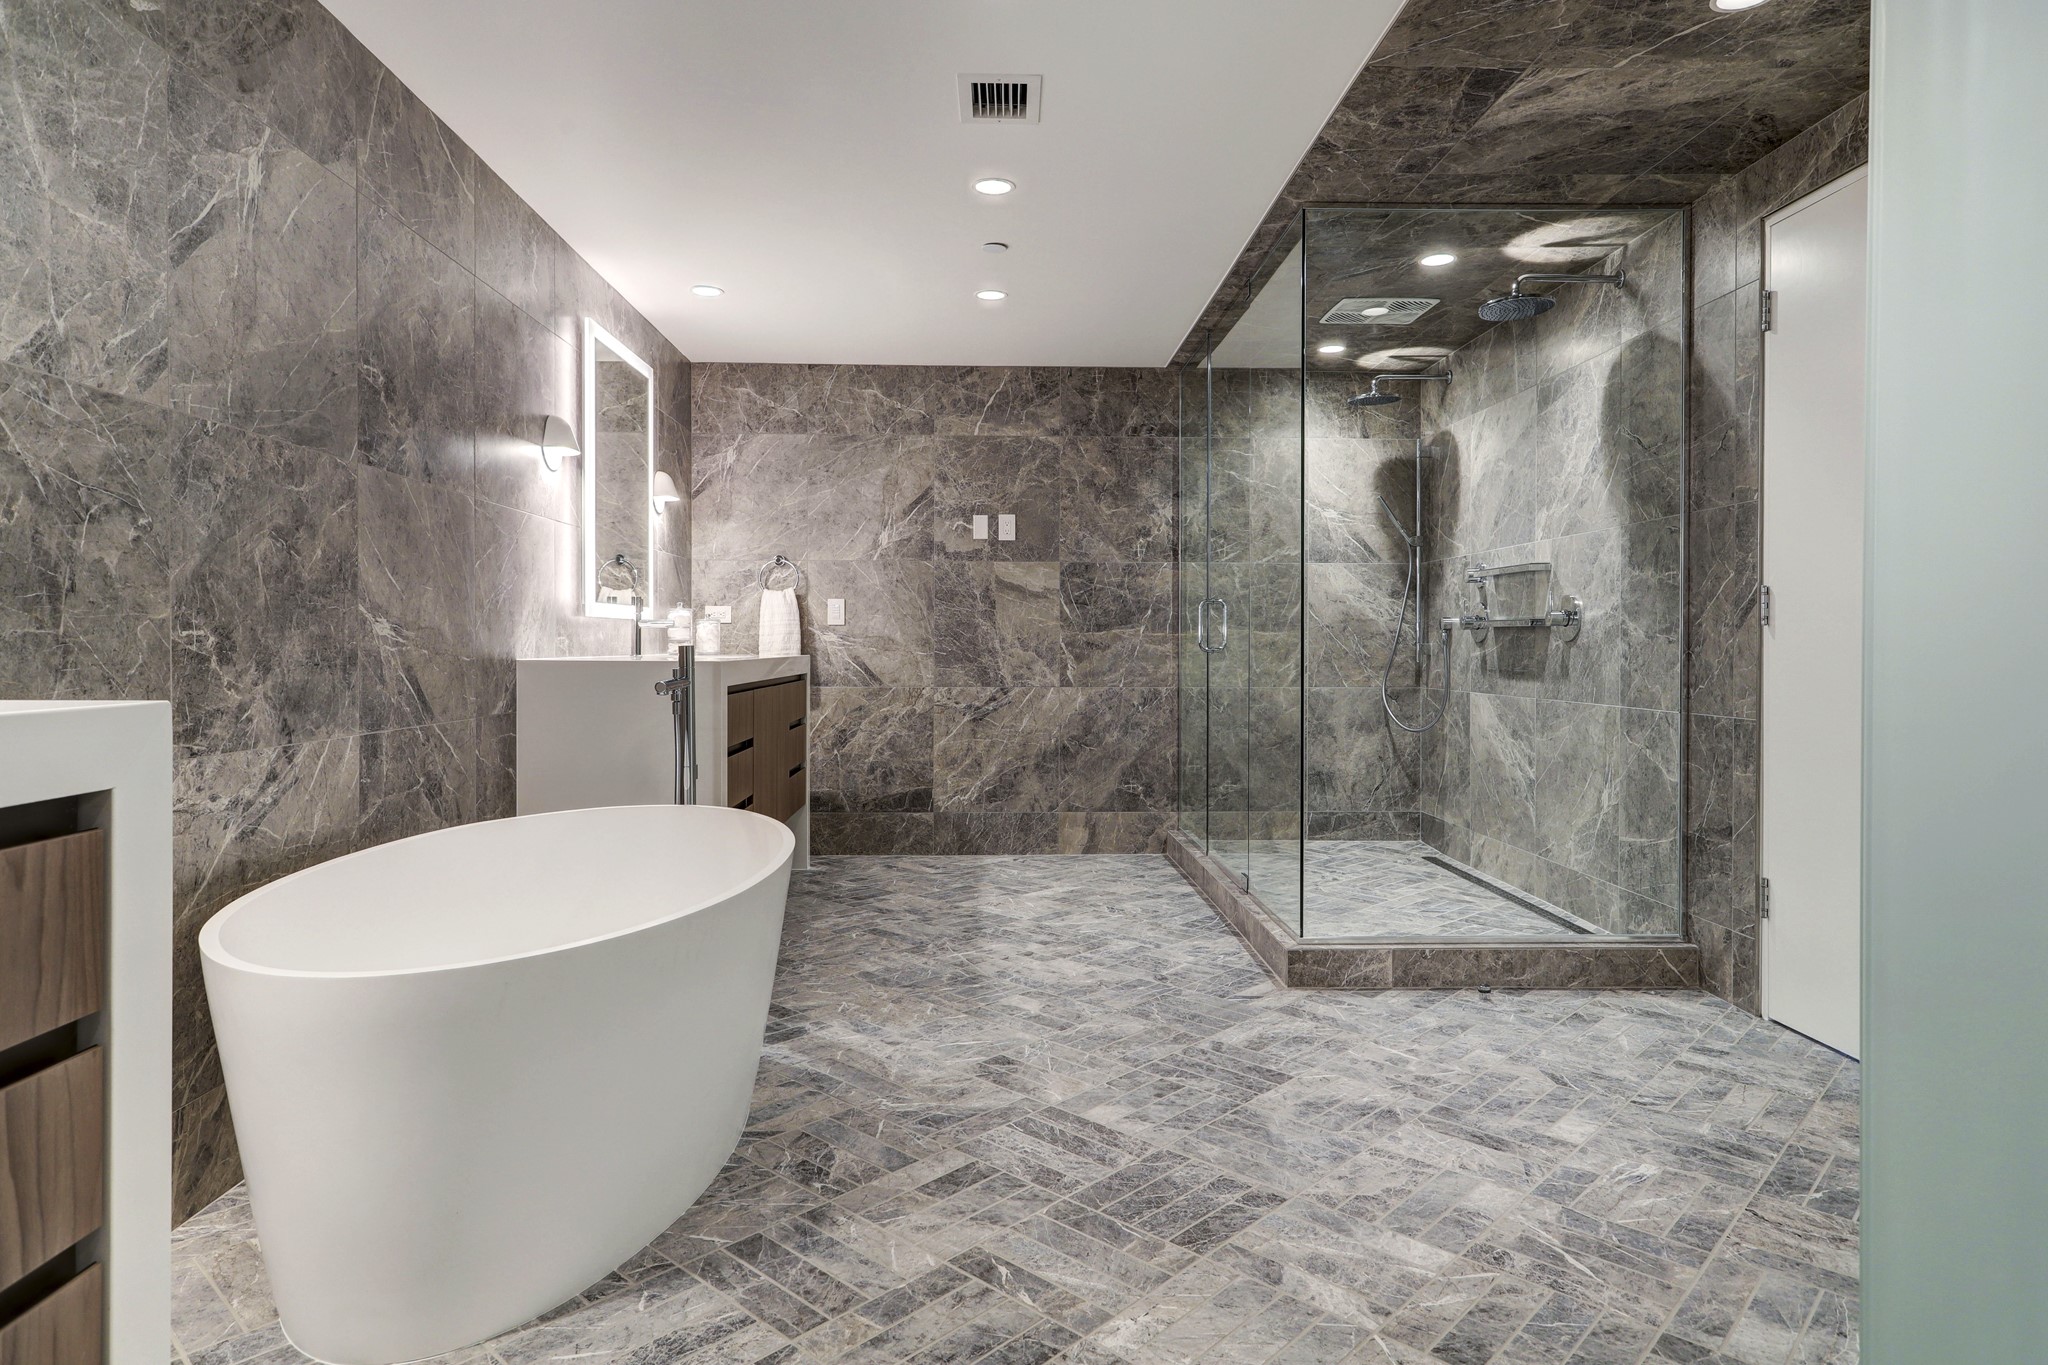 A shower, private water closet and floor-to-ceiling gray marble tile create an extraordinary spa experience in the main-floor primary en suite bathroom